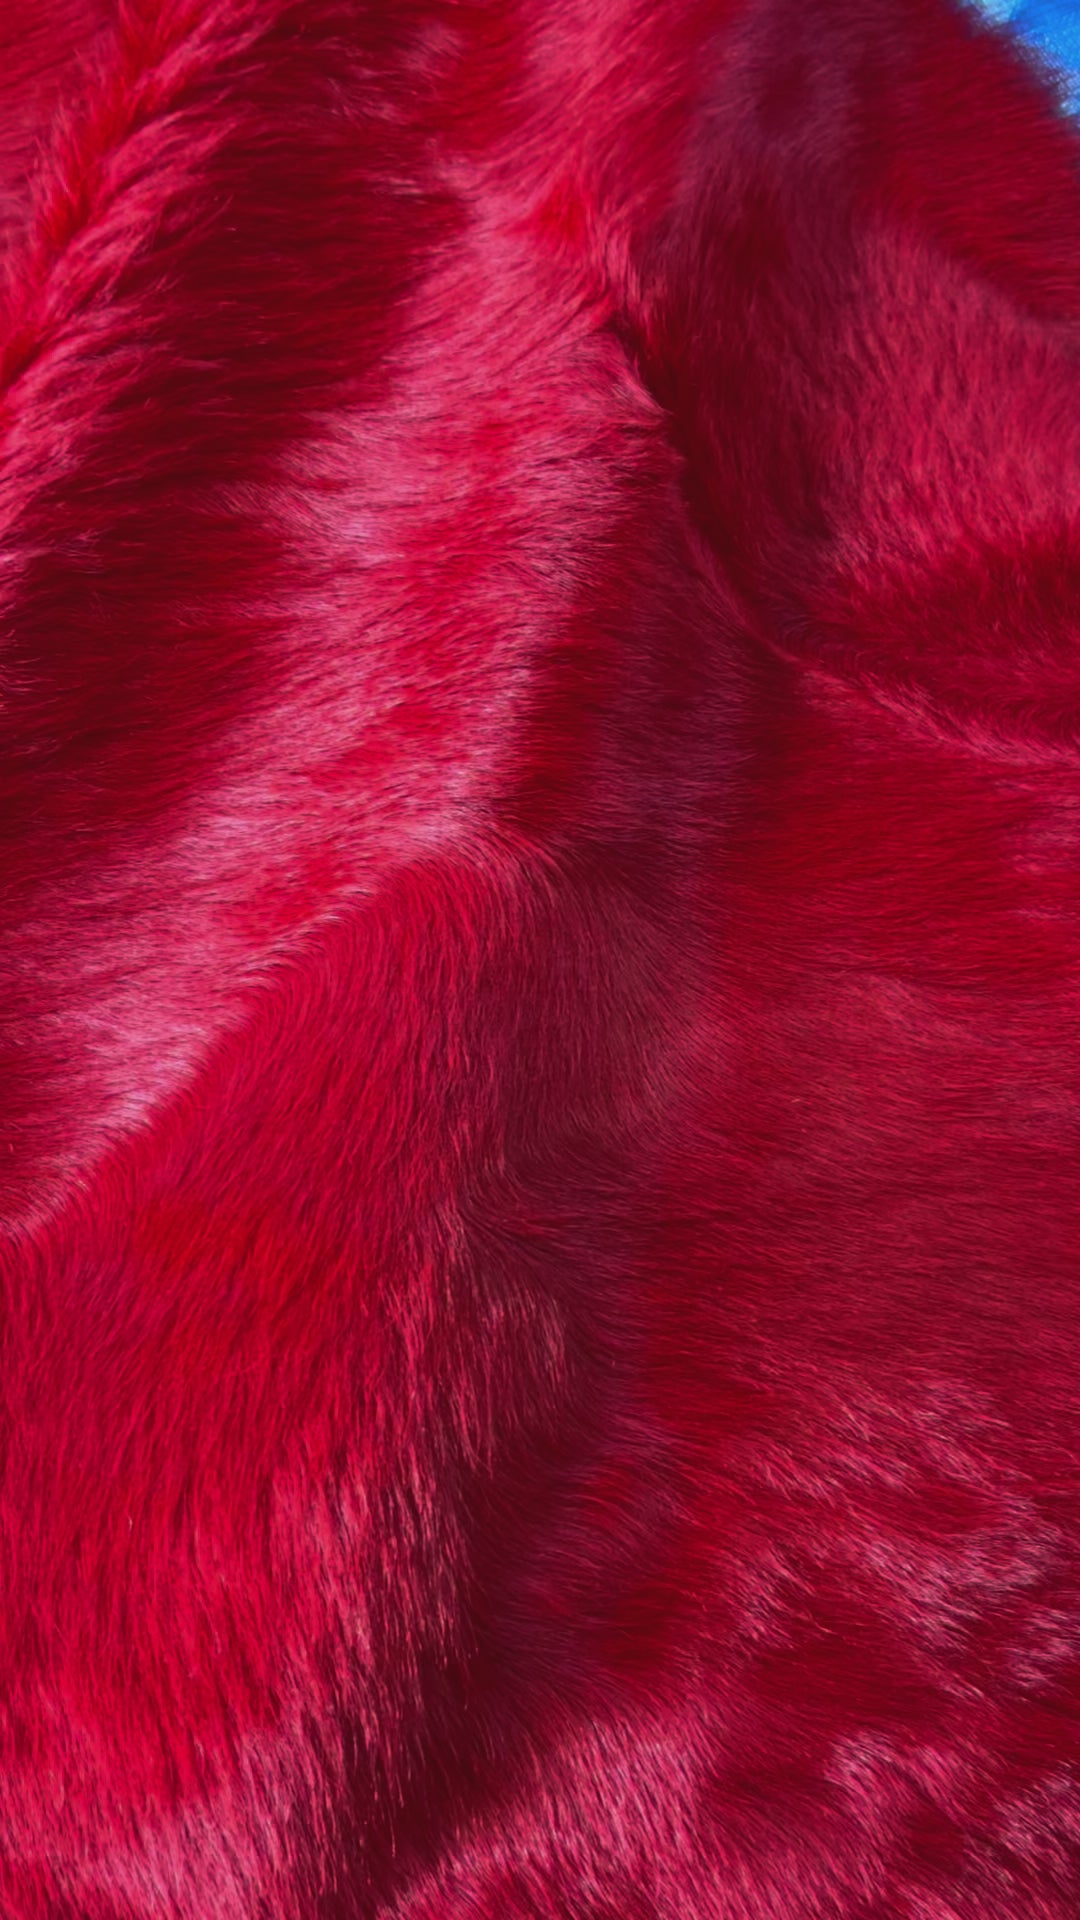 Dyed Red Cowhide Rug Size: 8.2x7 feet D-362